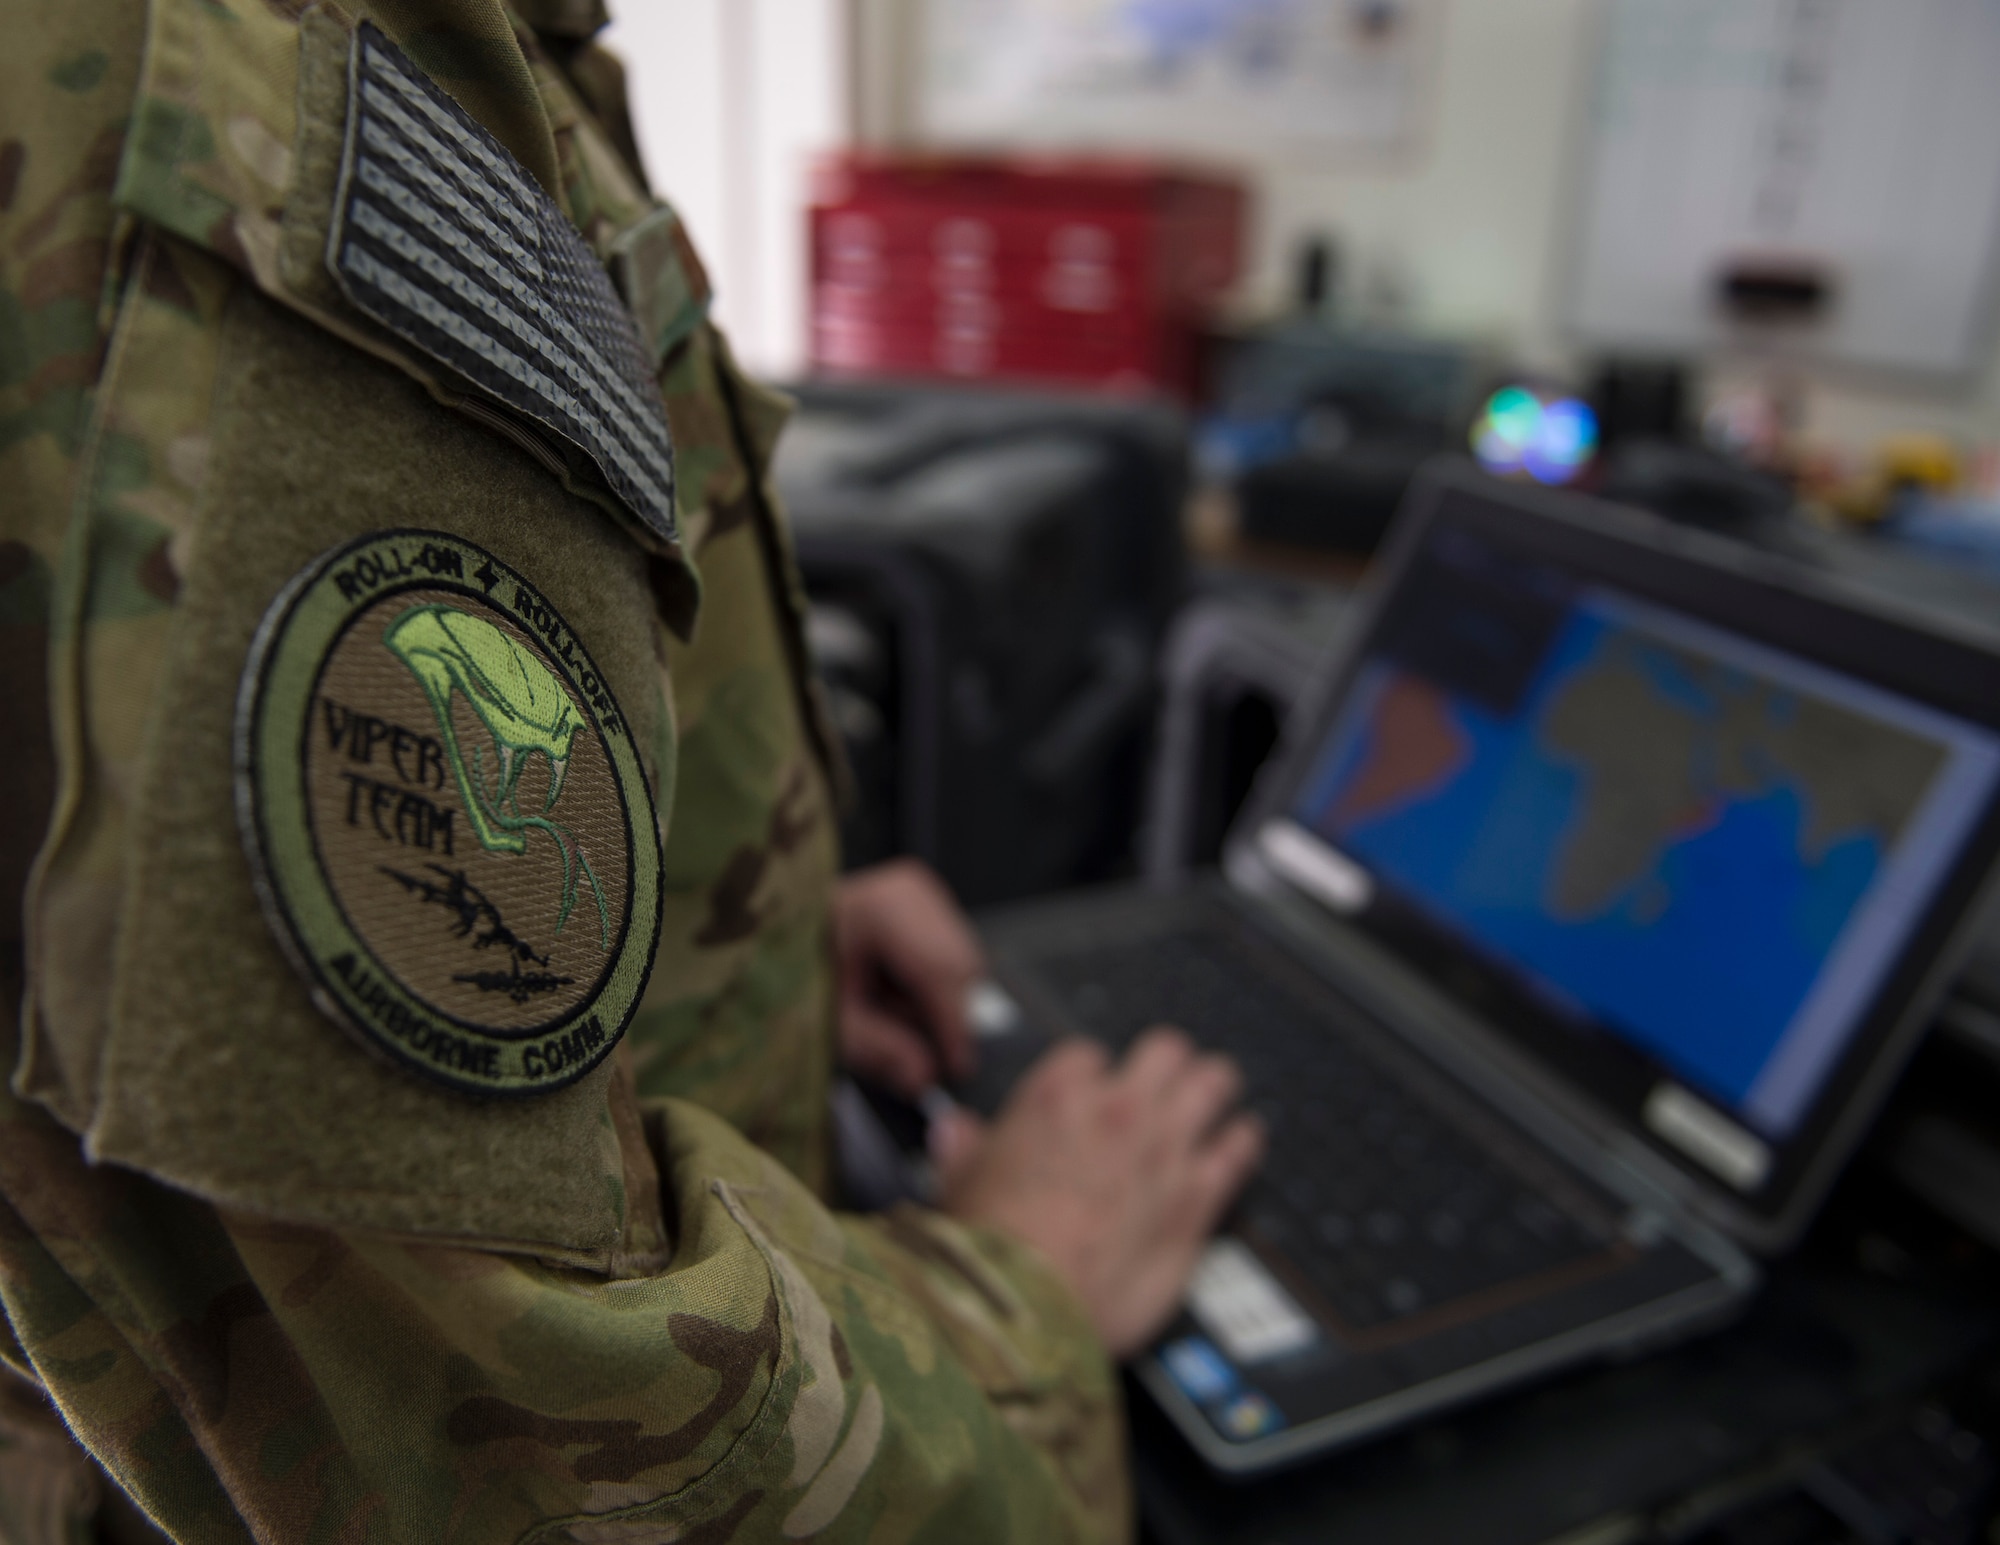 The Airborne Communication non-commissioned officer in charge with the 379th Expeditionary Communication Squadron performs a system check on equipment at Al Udeid Air Base, Qatar, July 14, 2017.